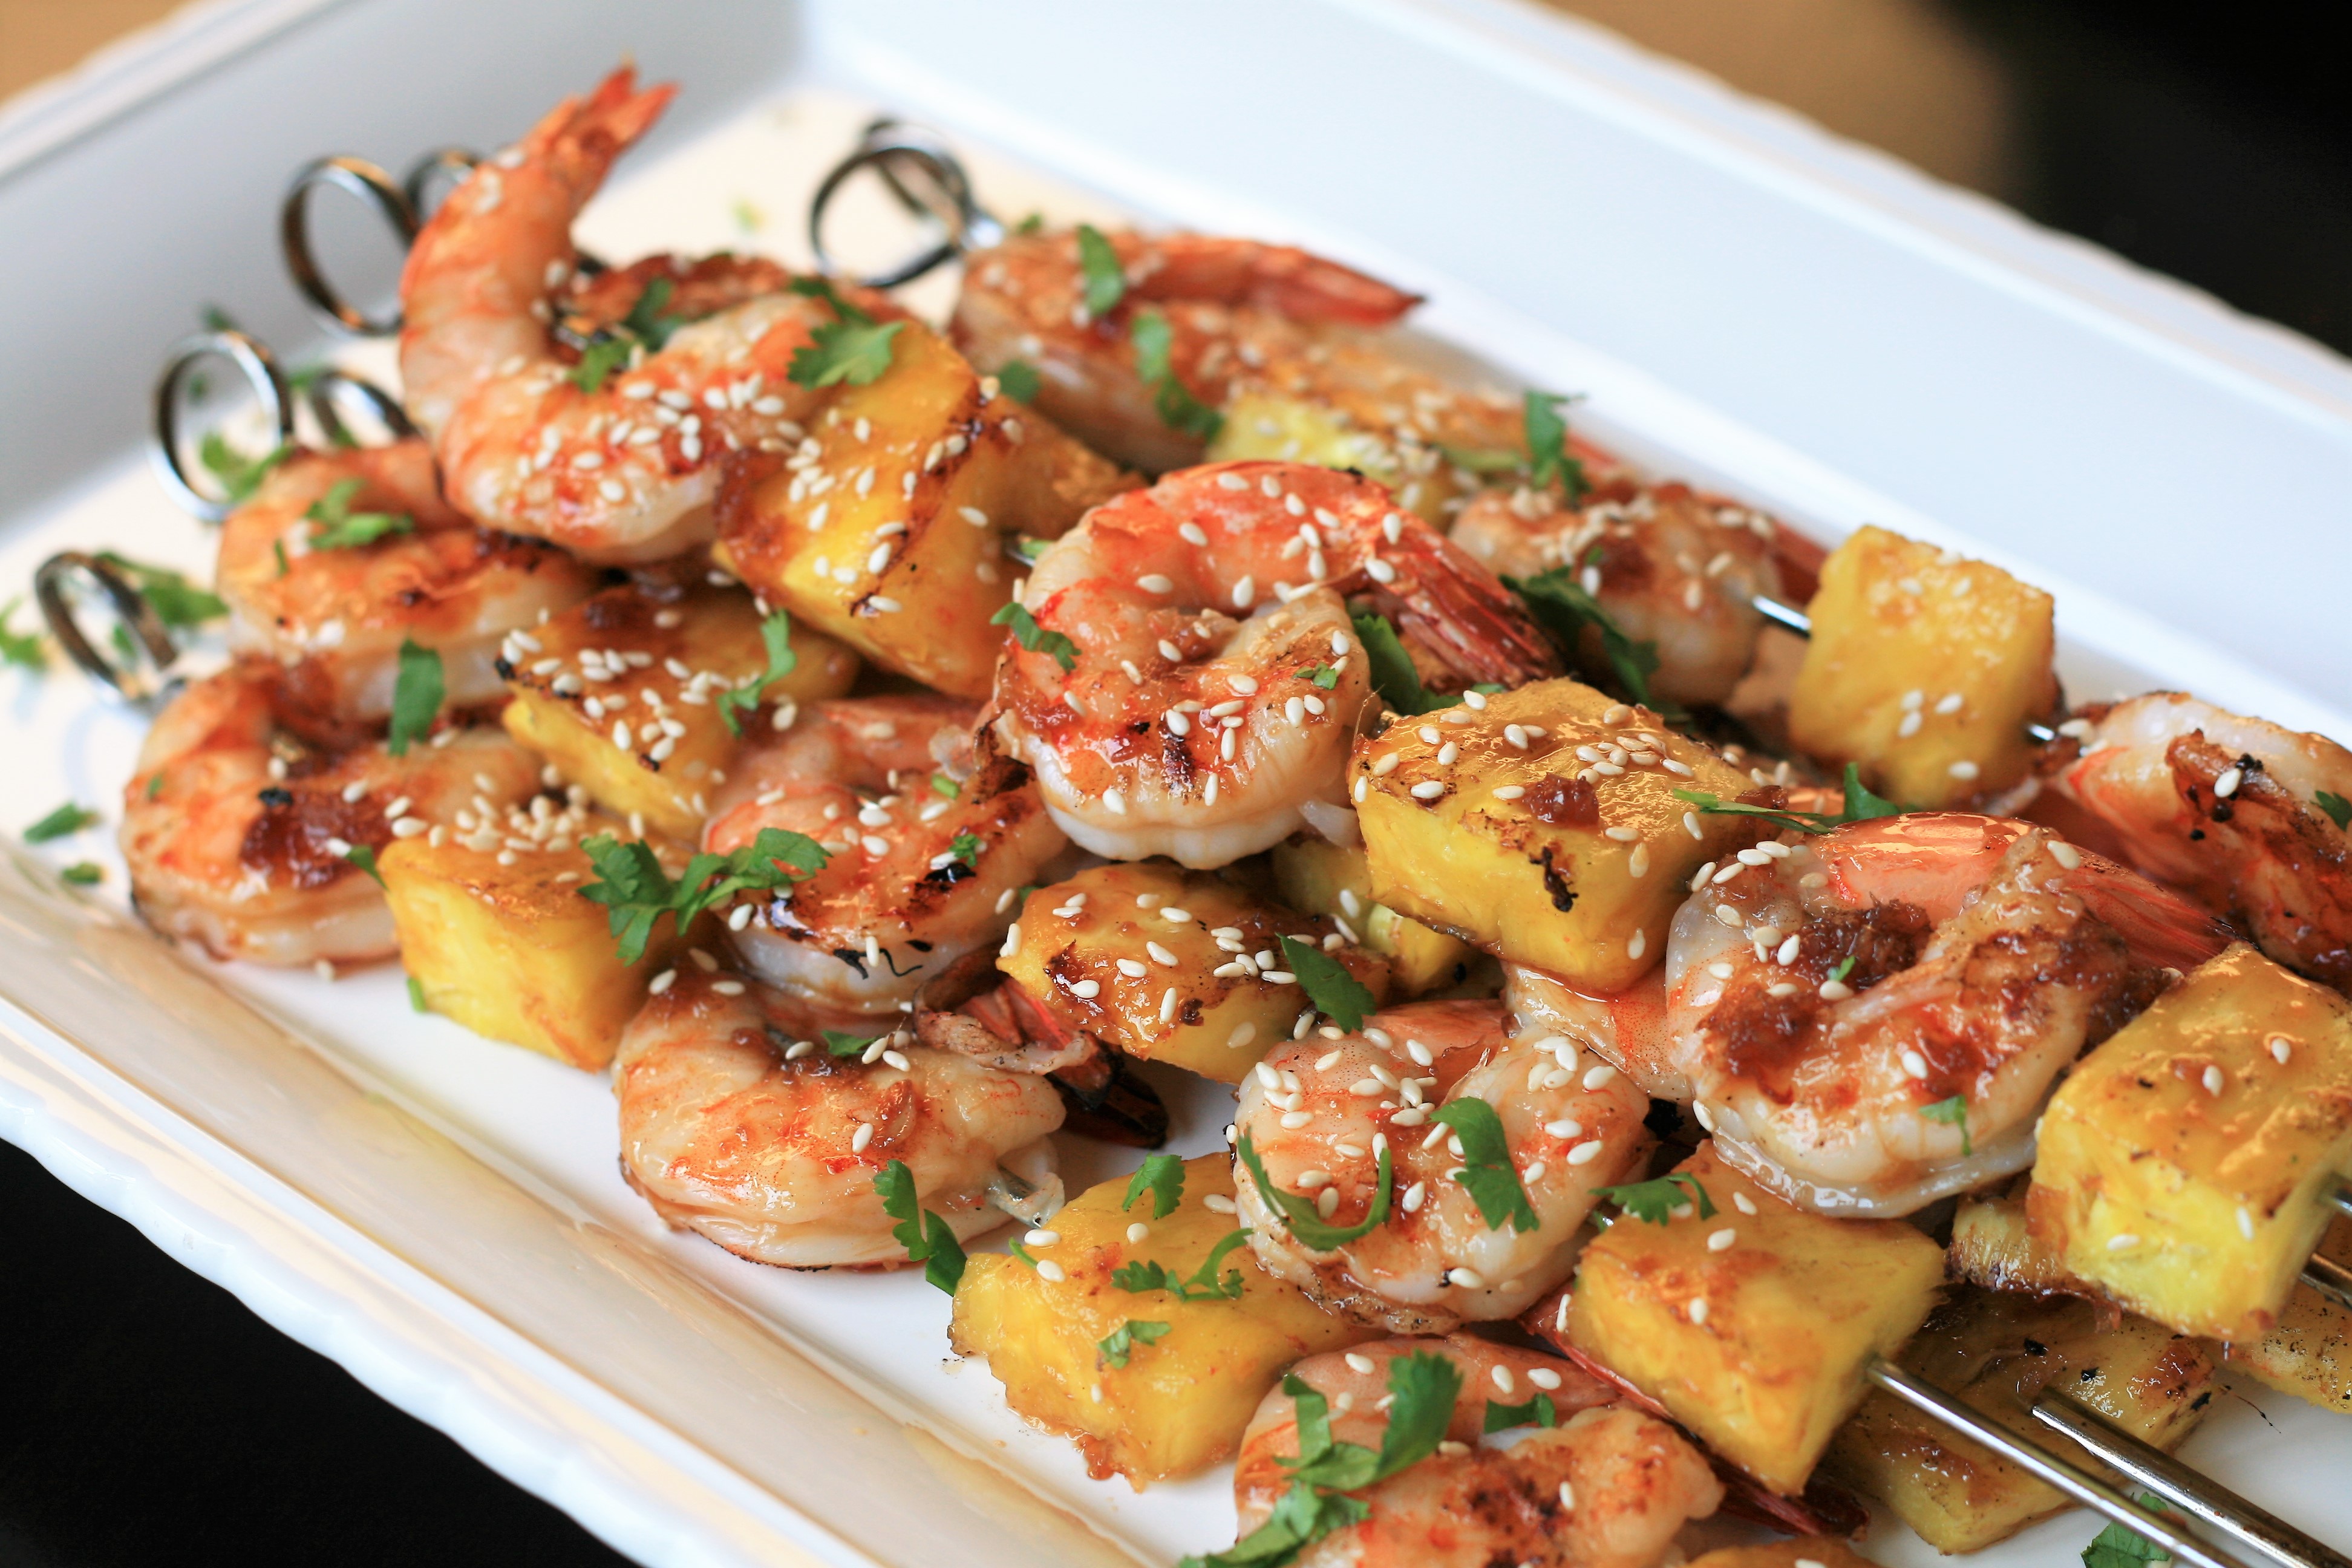 <p>A simple homemade teriyaki sauce is the key here. "These savory-sweet shrimp skewers are easy to make and cook in just a few minutes," says France C. "They are perfect for summer weeknights or weekend dinner parties. Prep the sauce ahead of time for an even faster dinner. I prefer to use jumbo shrimp (21-25 per pound), however use what you have on hand."</p>
                          <p> </p>
                          